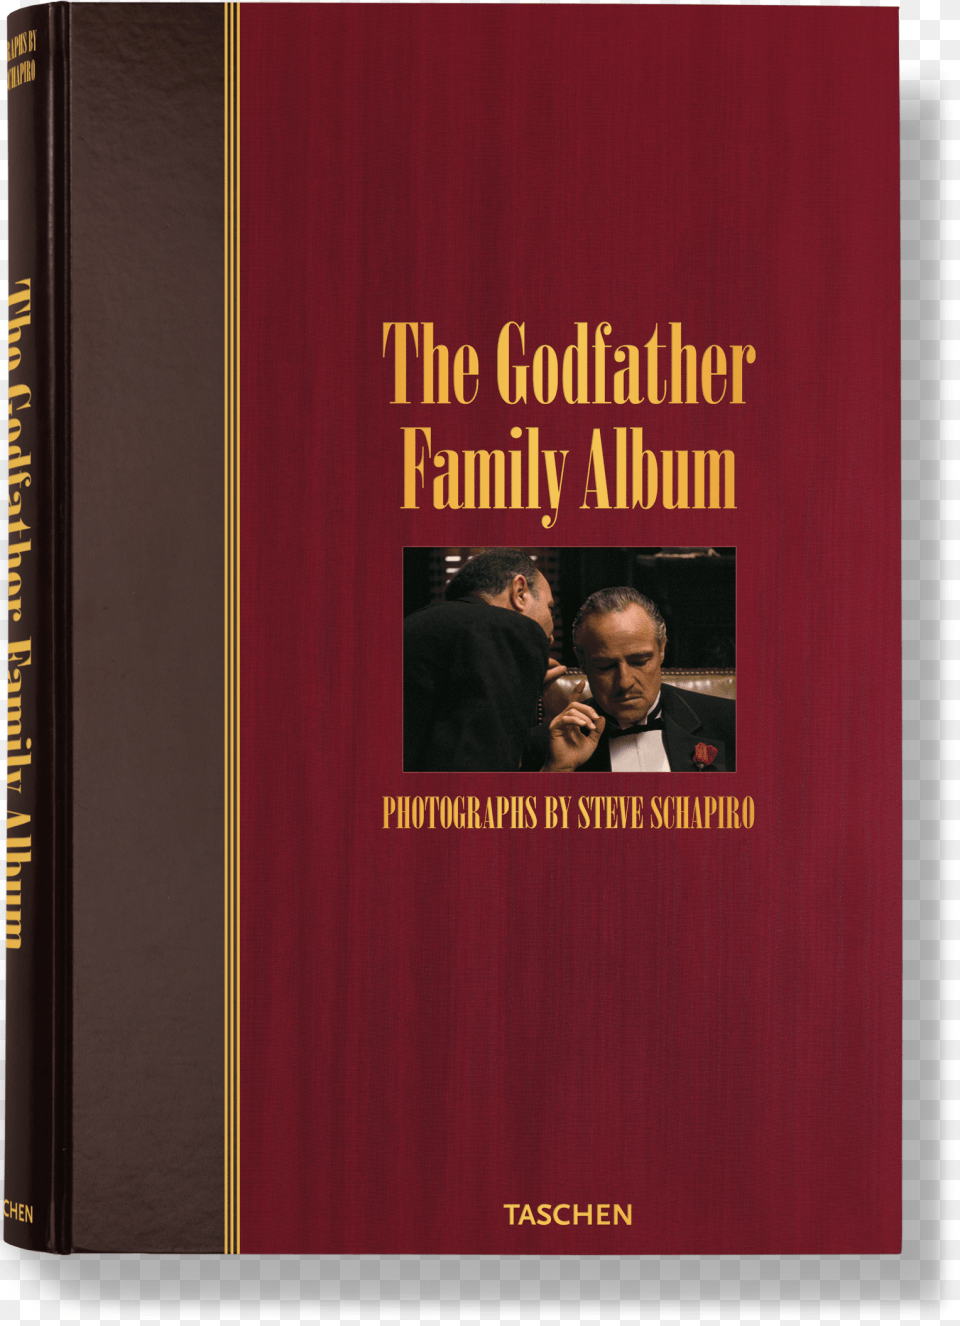 The Godfather Godfather Limited Edition, Book, Publication, Adult, Person Png